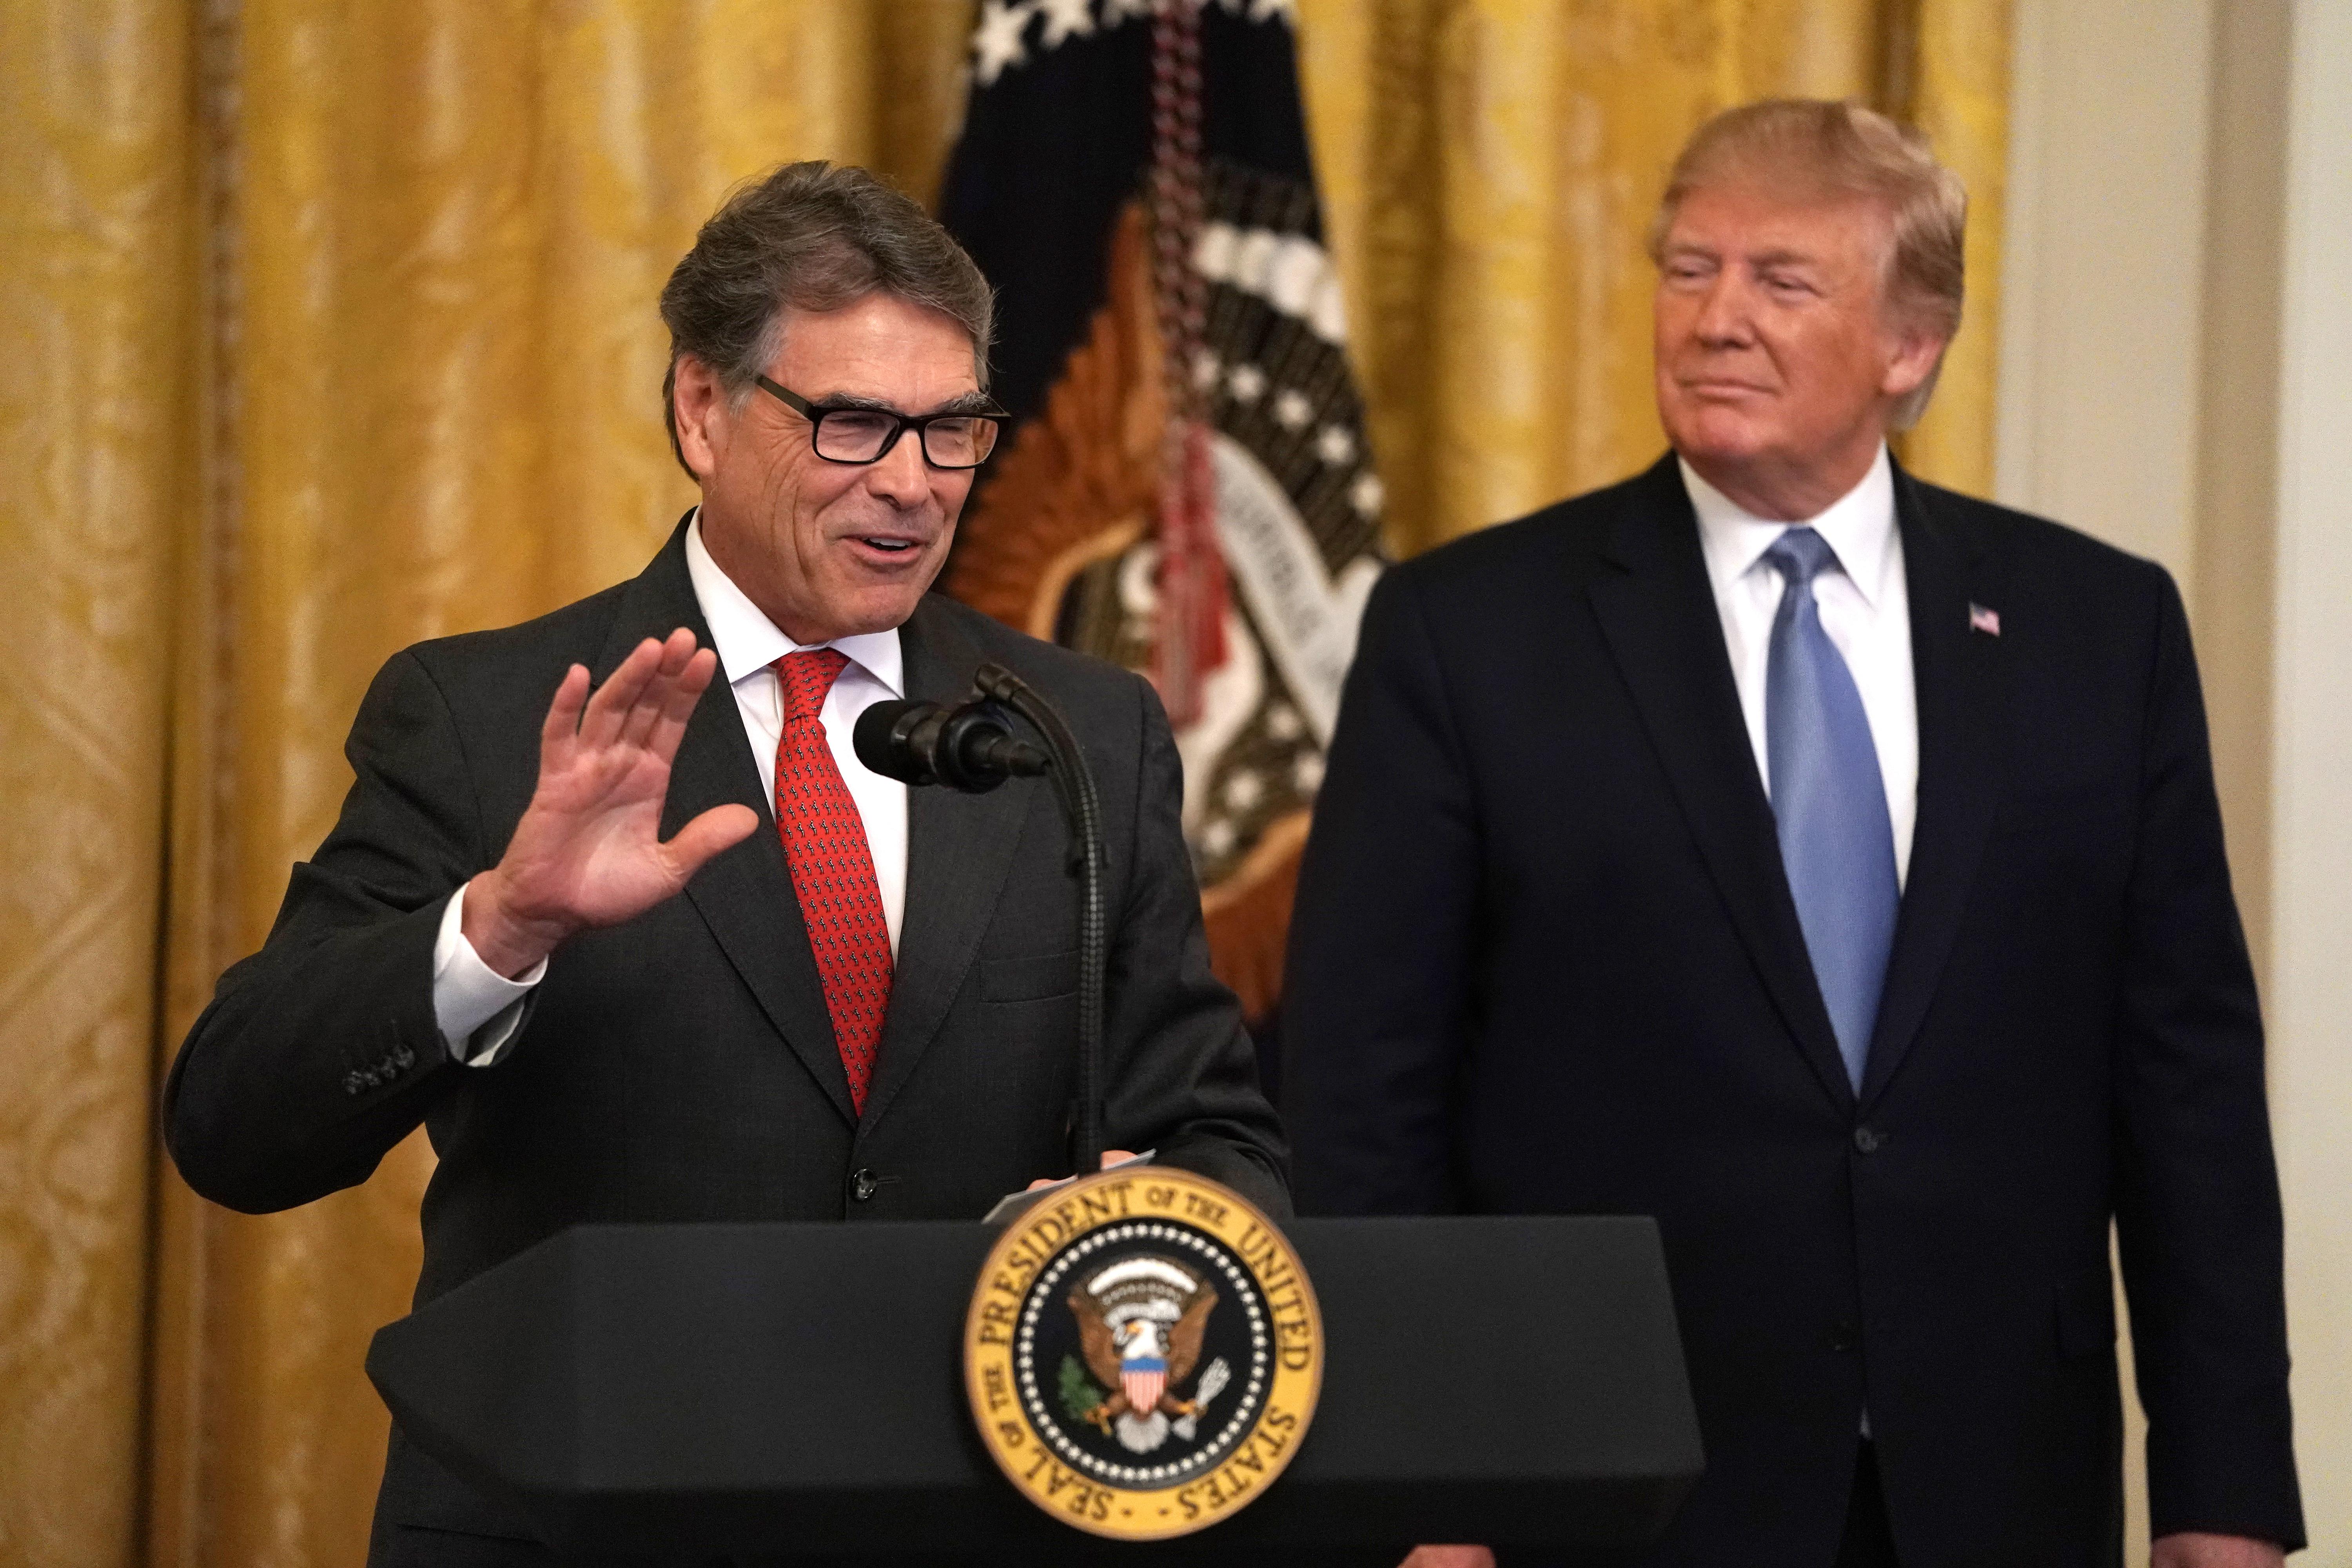 Energy Secretary Rick Perry speaks as President Donald Trump looks on at the White House on July 7, 2019.